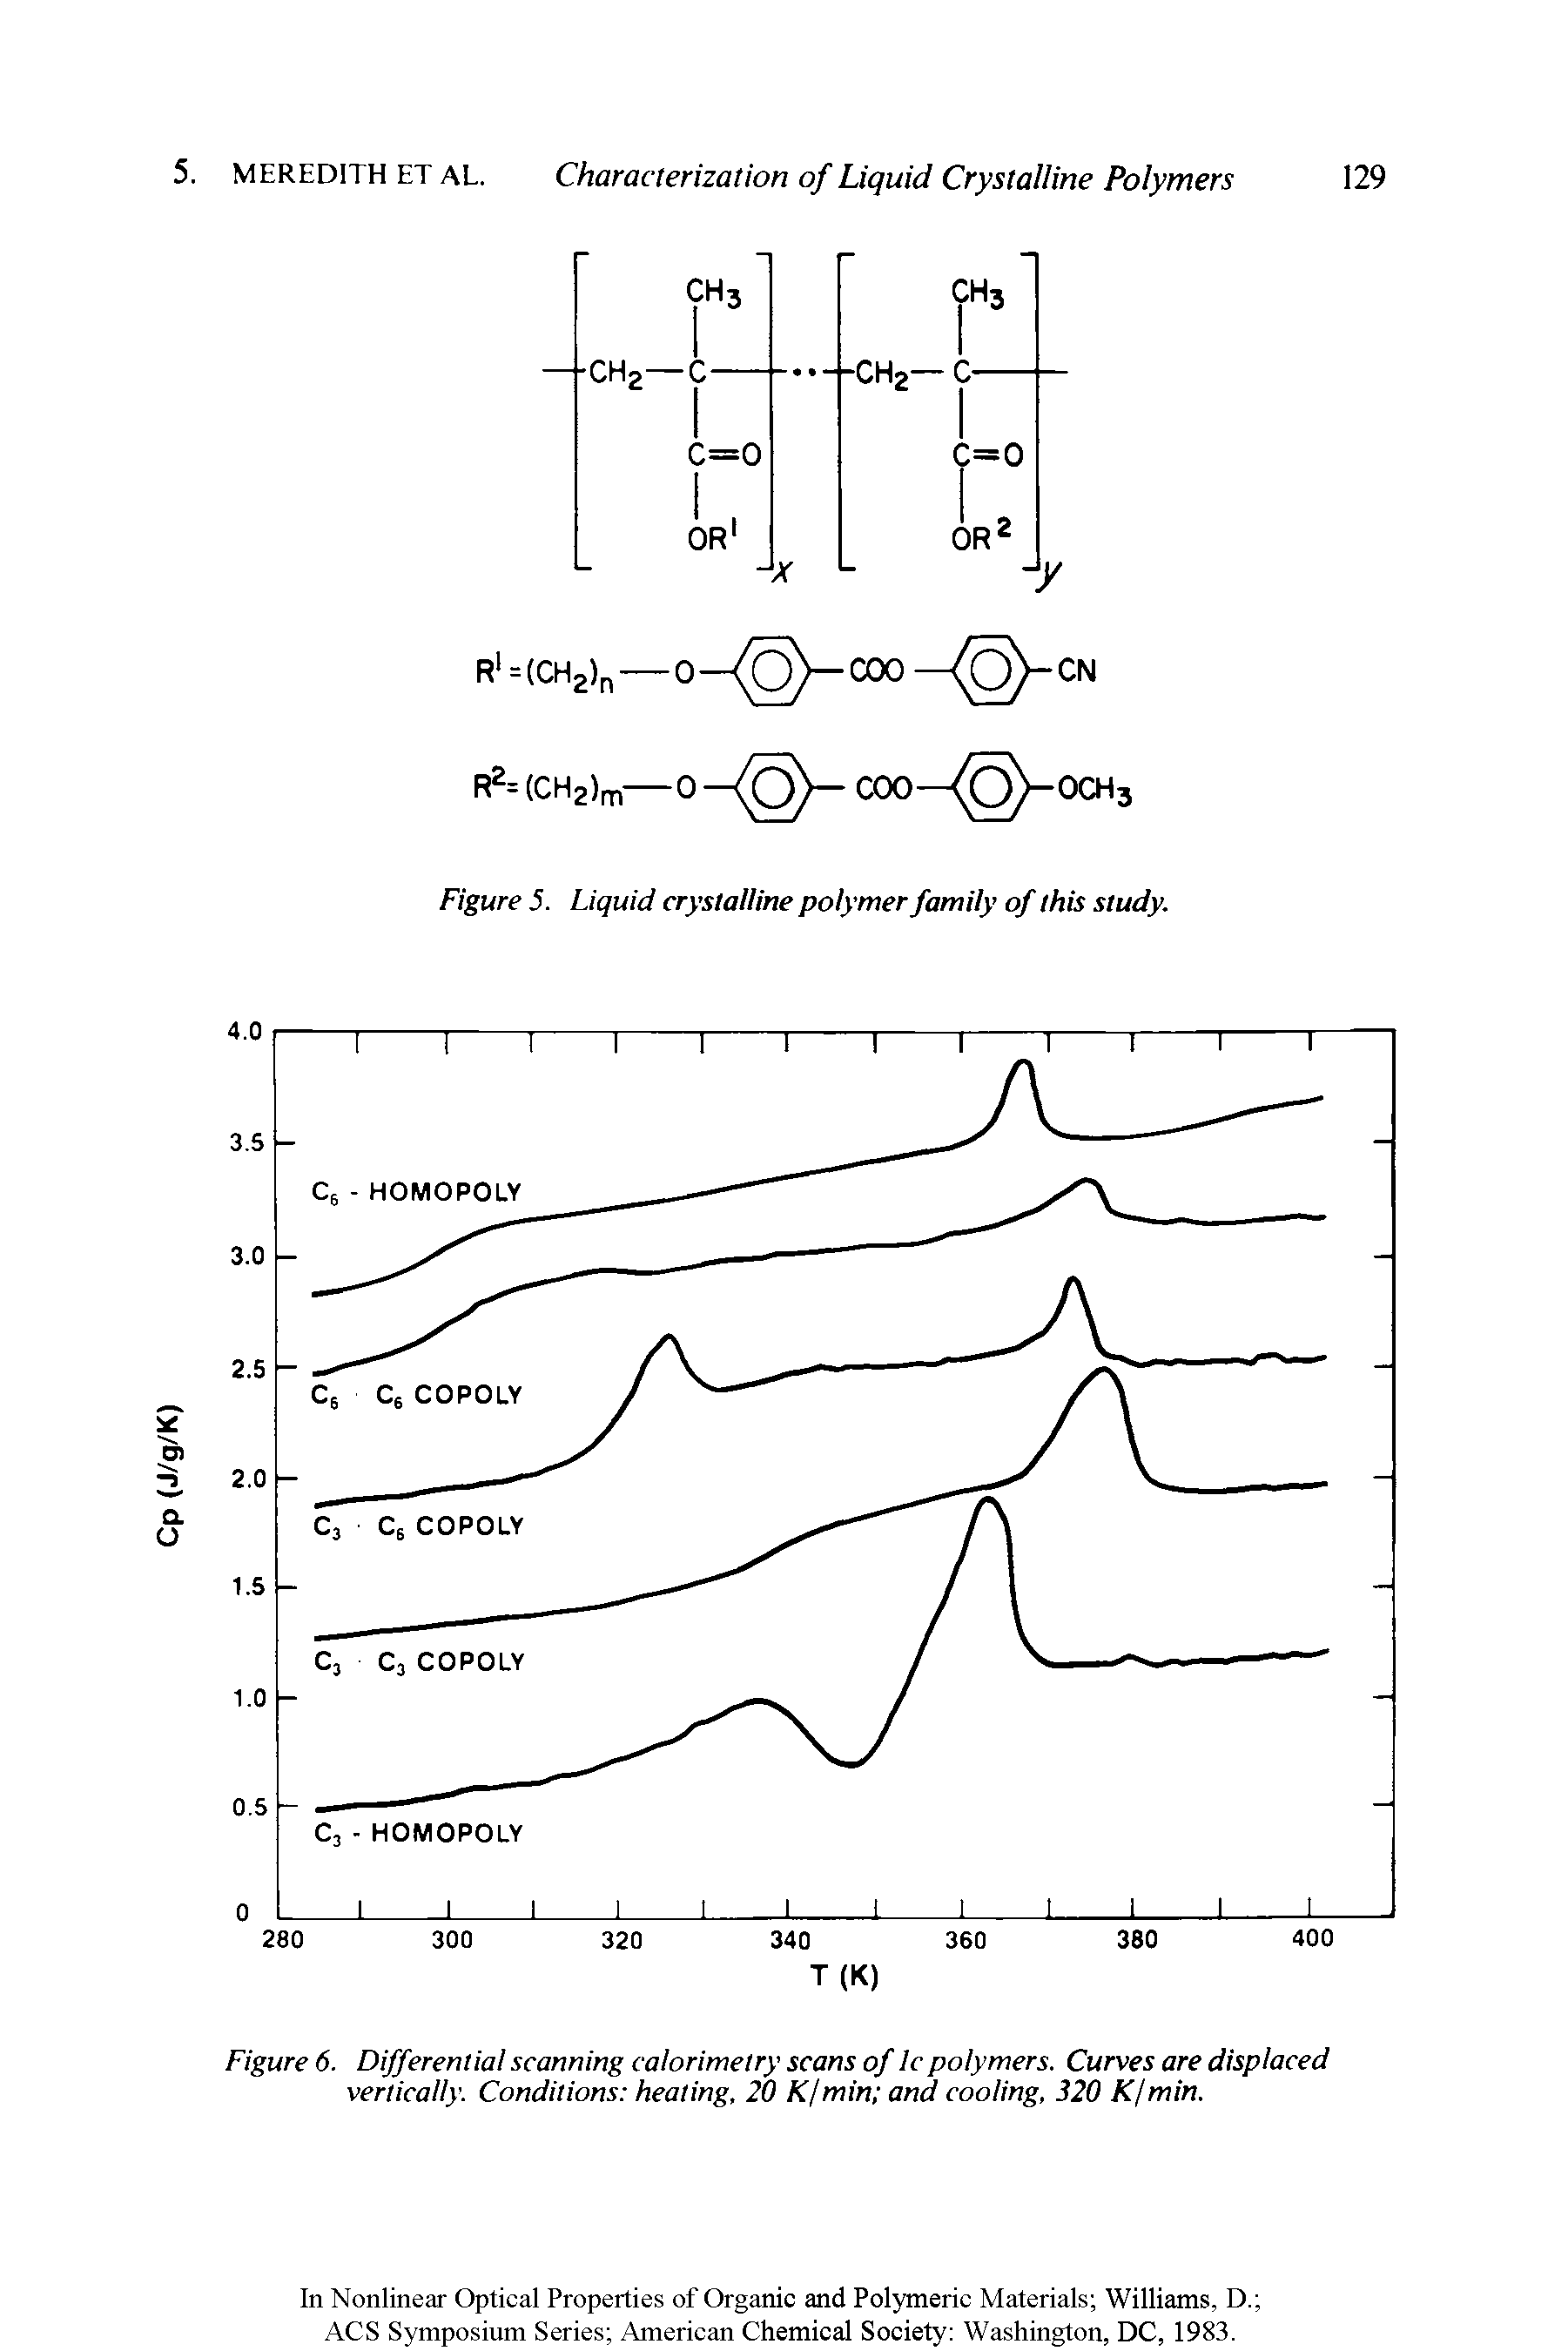 Figure 6. Differential scanning calorimetry scans of 1c polymers. Curves are displaced vertically. Conditions heating, 20 K/min and cooling, 320 K/min.